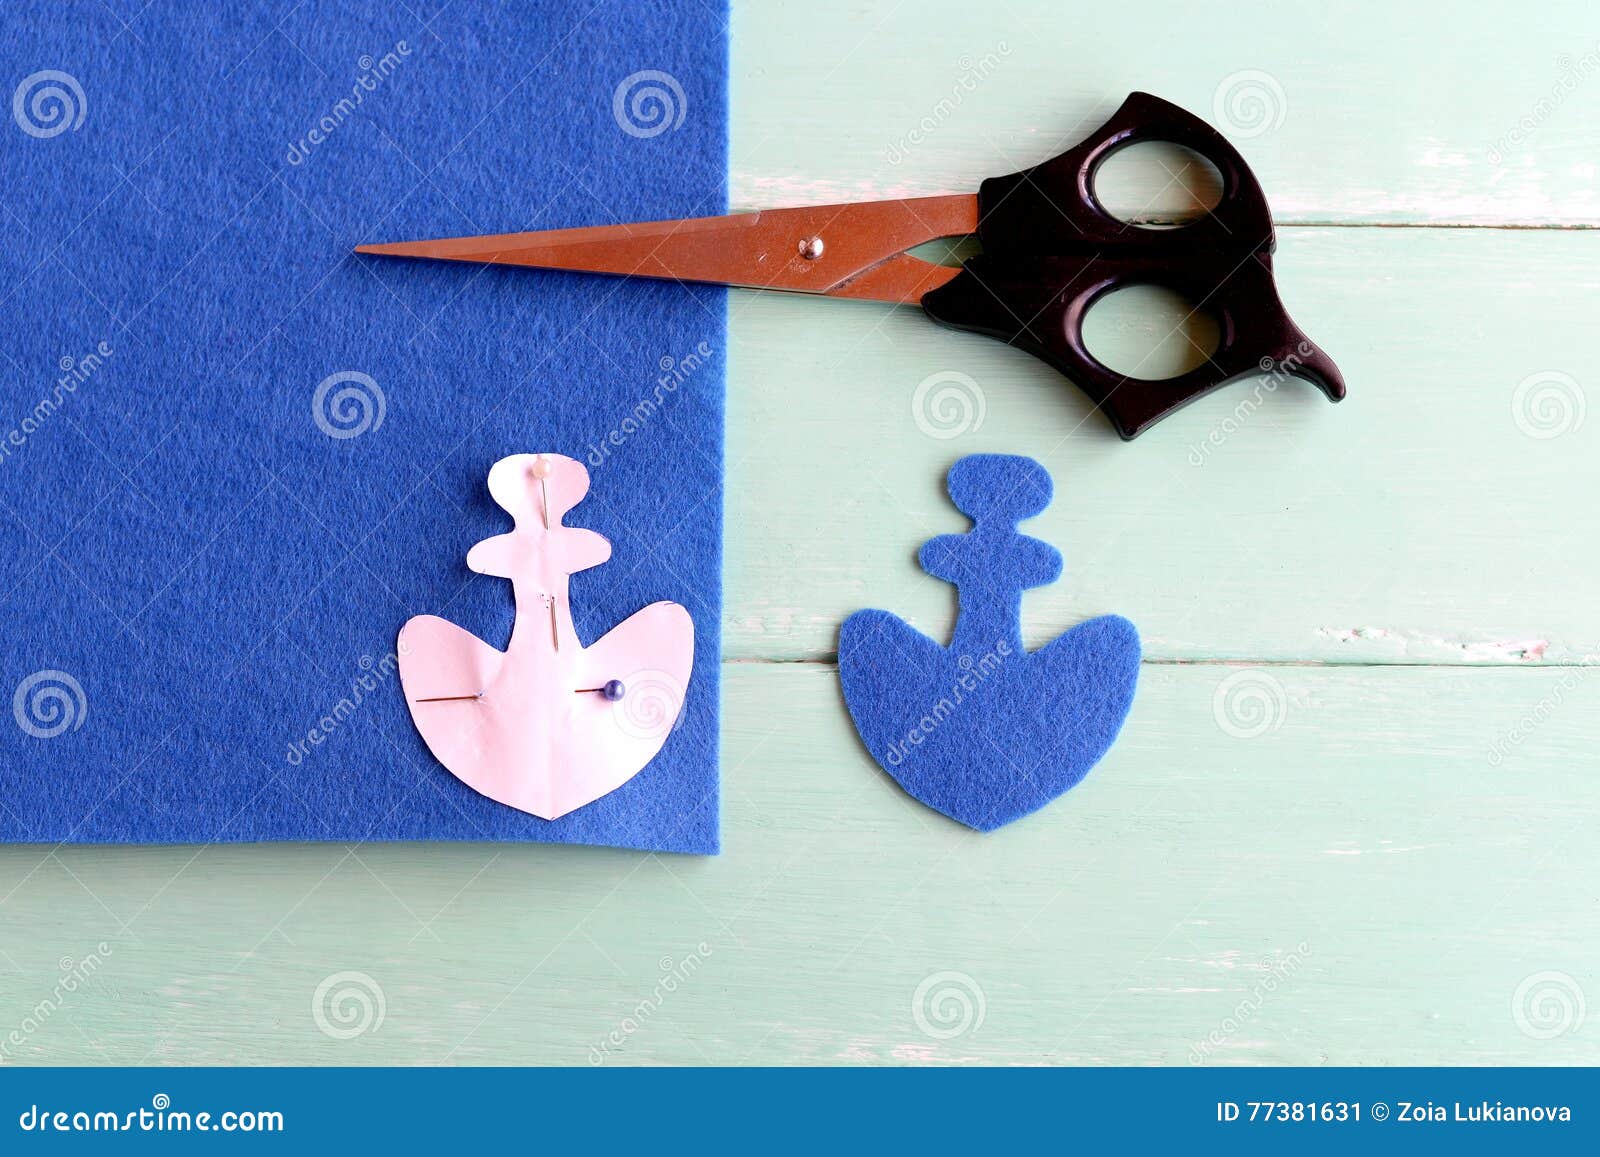 Felt Piece Cut into the Shape of an Anchor. Scissors, Paper Template, Pins  on Wooden Background. Sewing Lesson for Kids Stock Image - Image of  pattern, equipment: 77381631